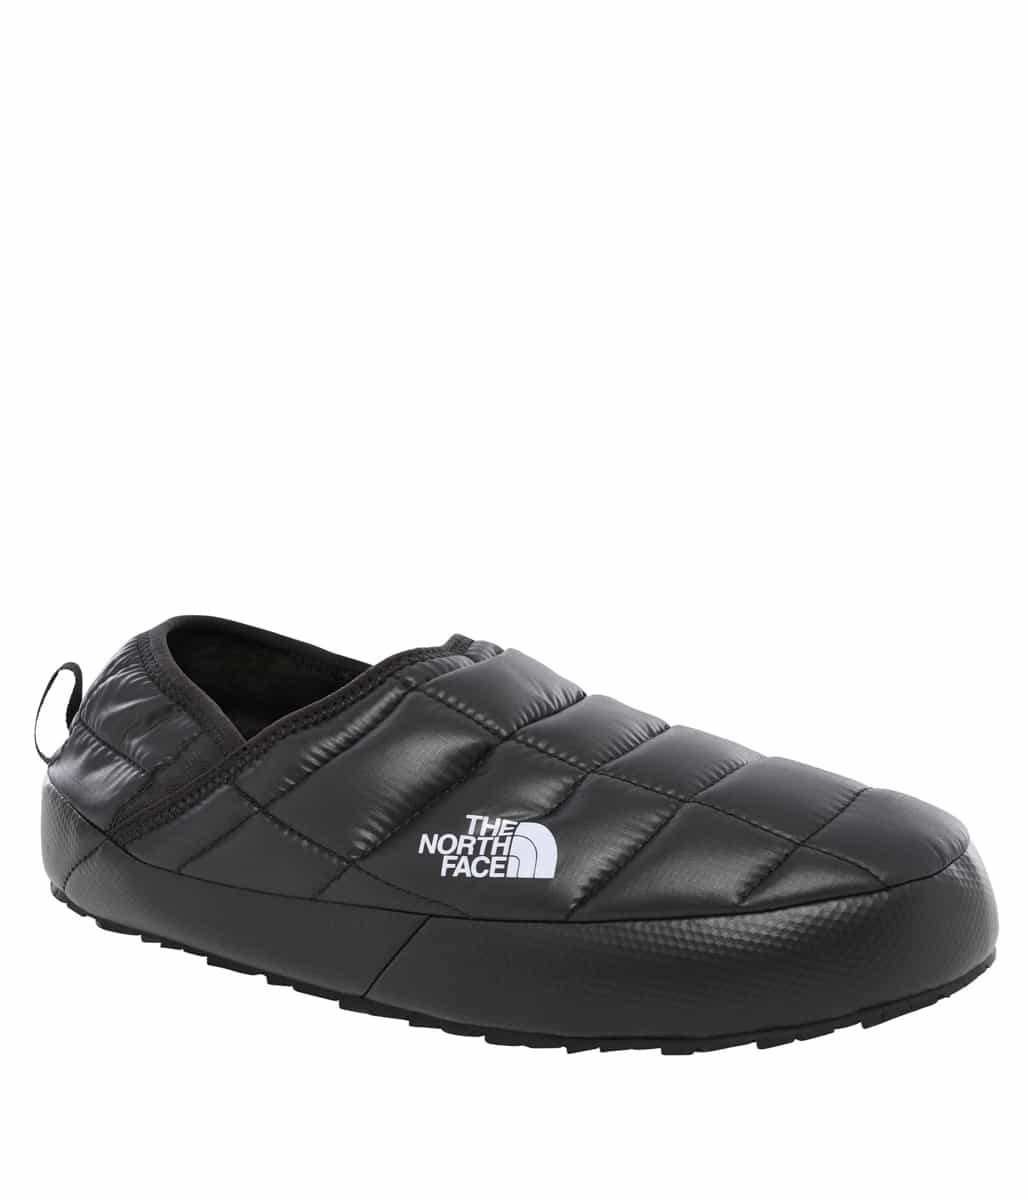 The North Face Men’s Thermoball Traction Mule V Tnf Black/Tnf White